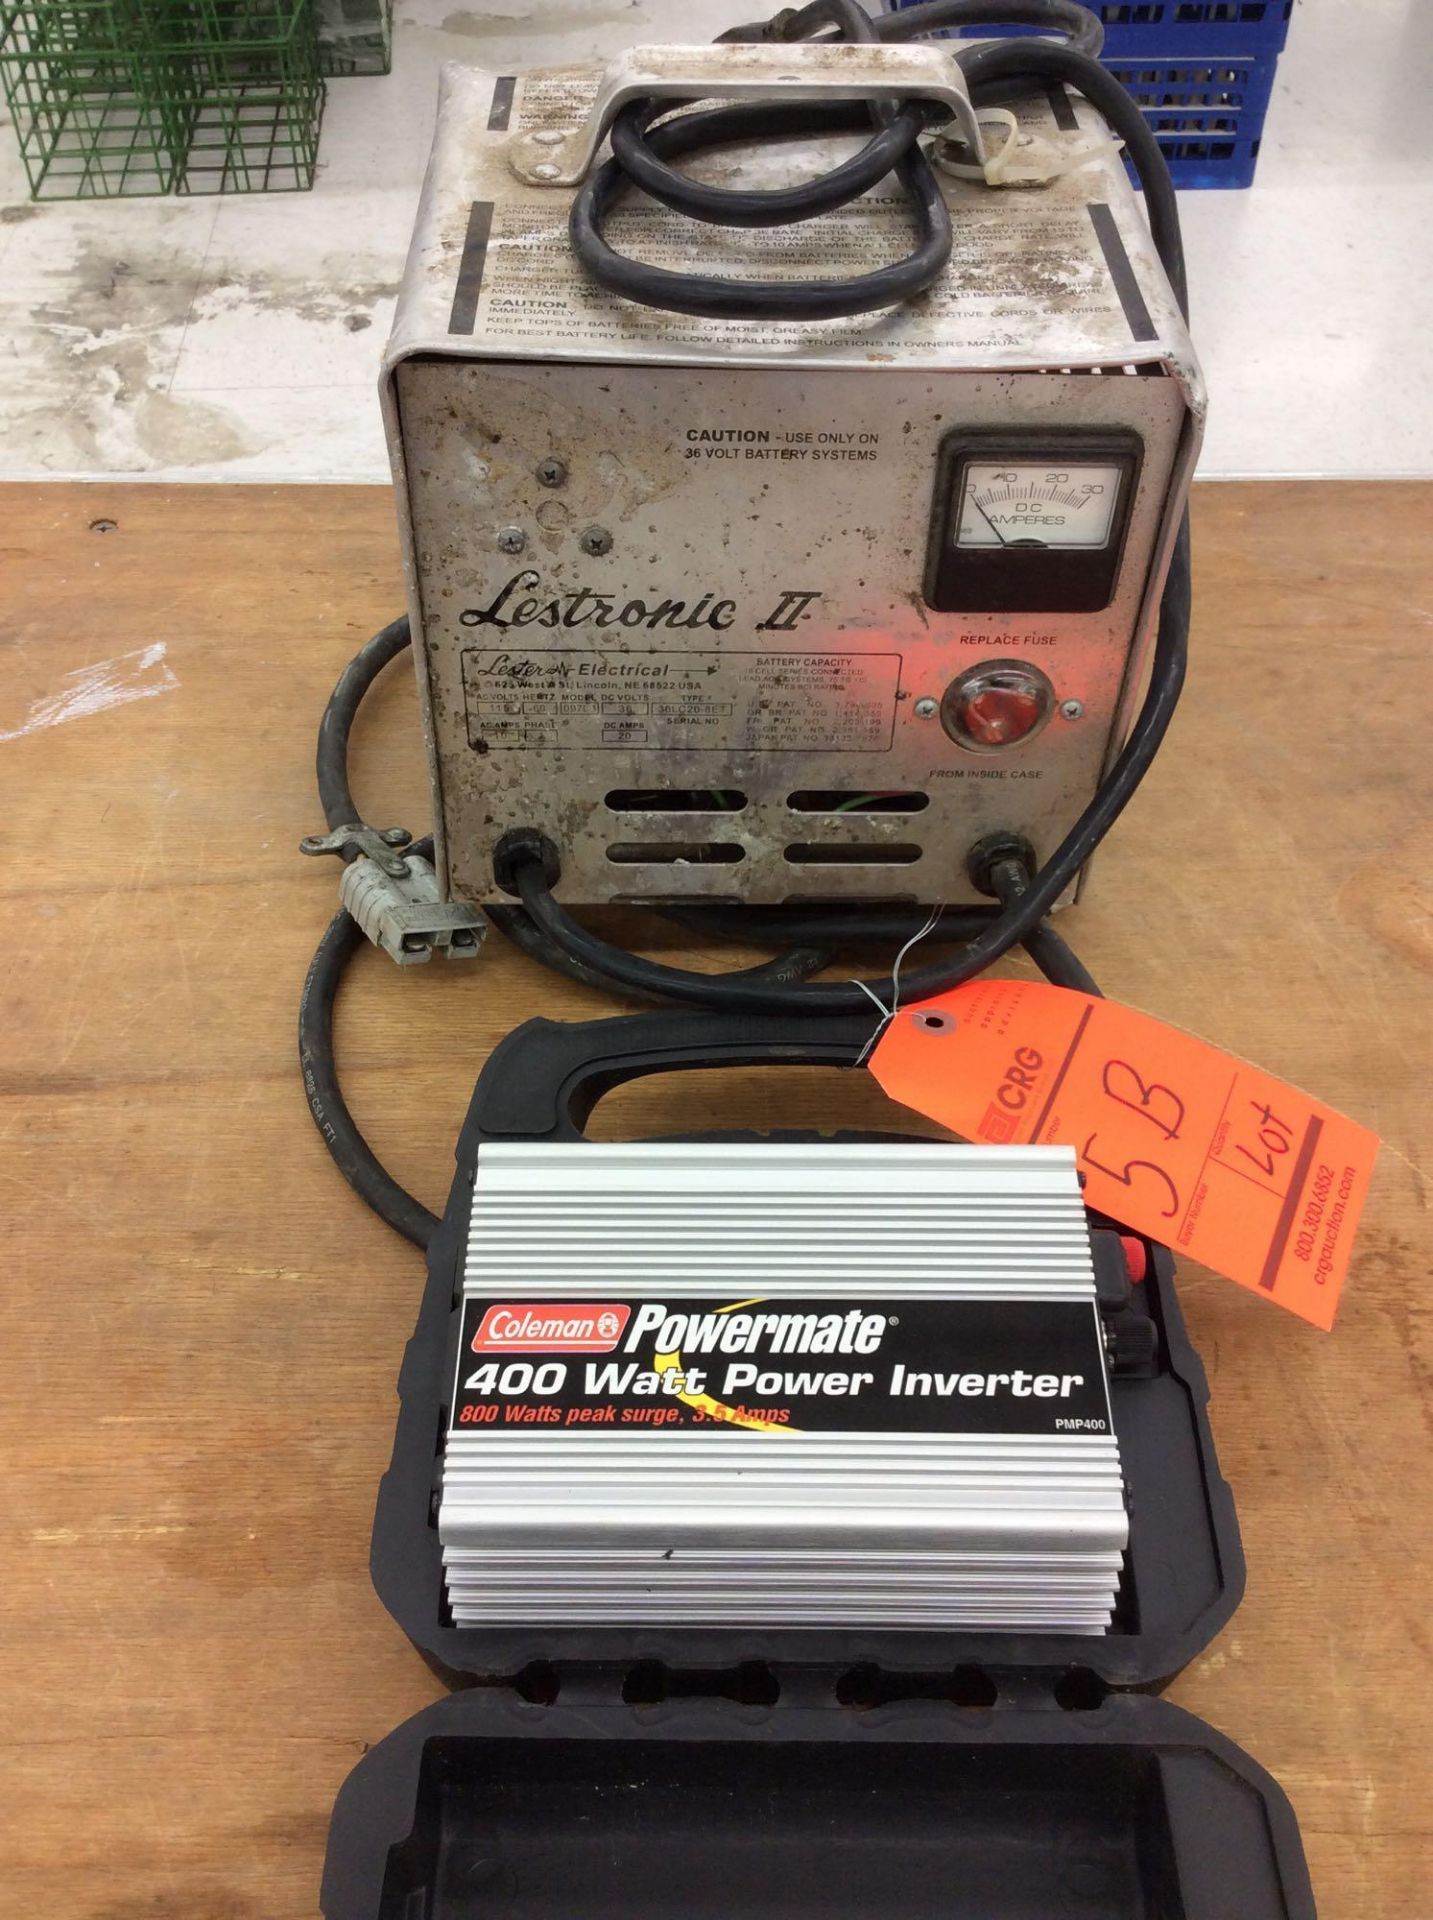 Coleman Powermate 400 watt inverter, Lectronic II golf cart charger, one pair of jumper cables,